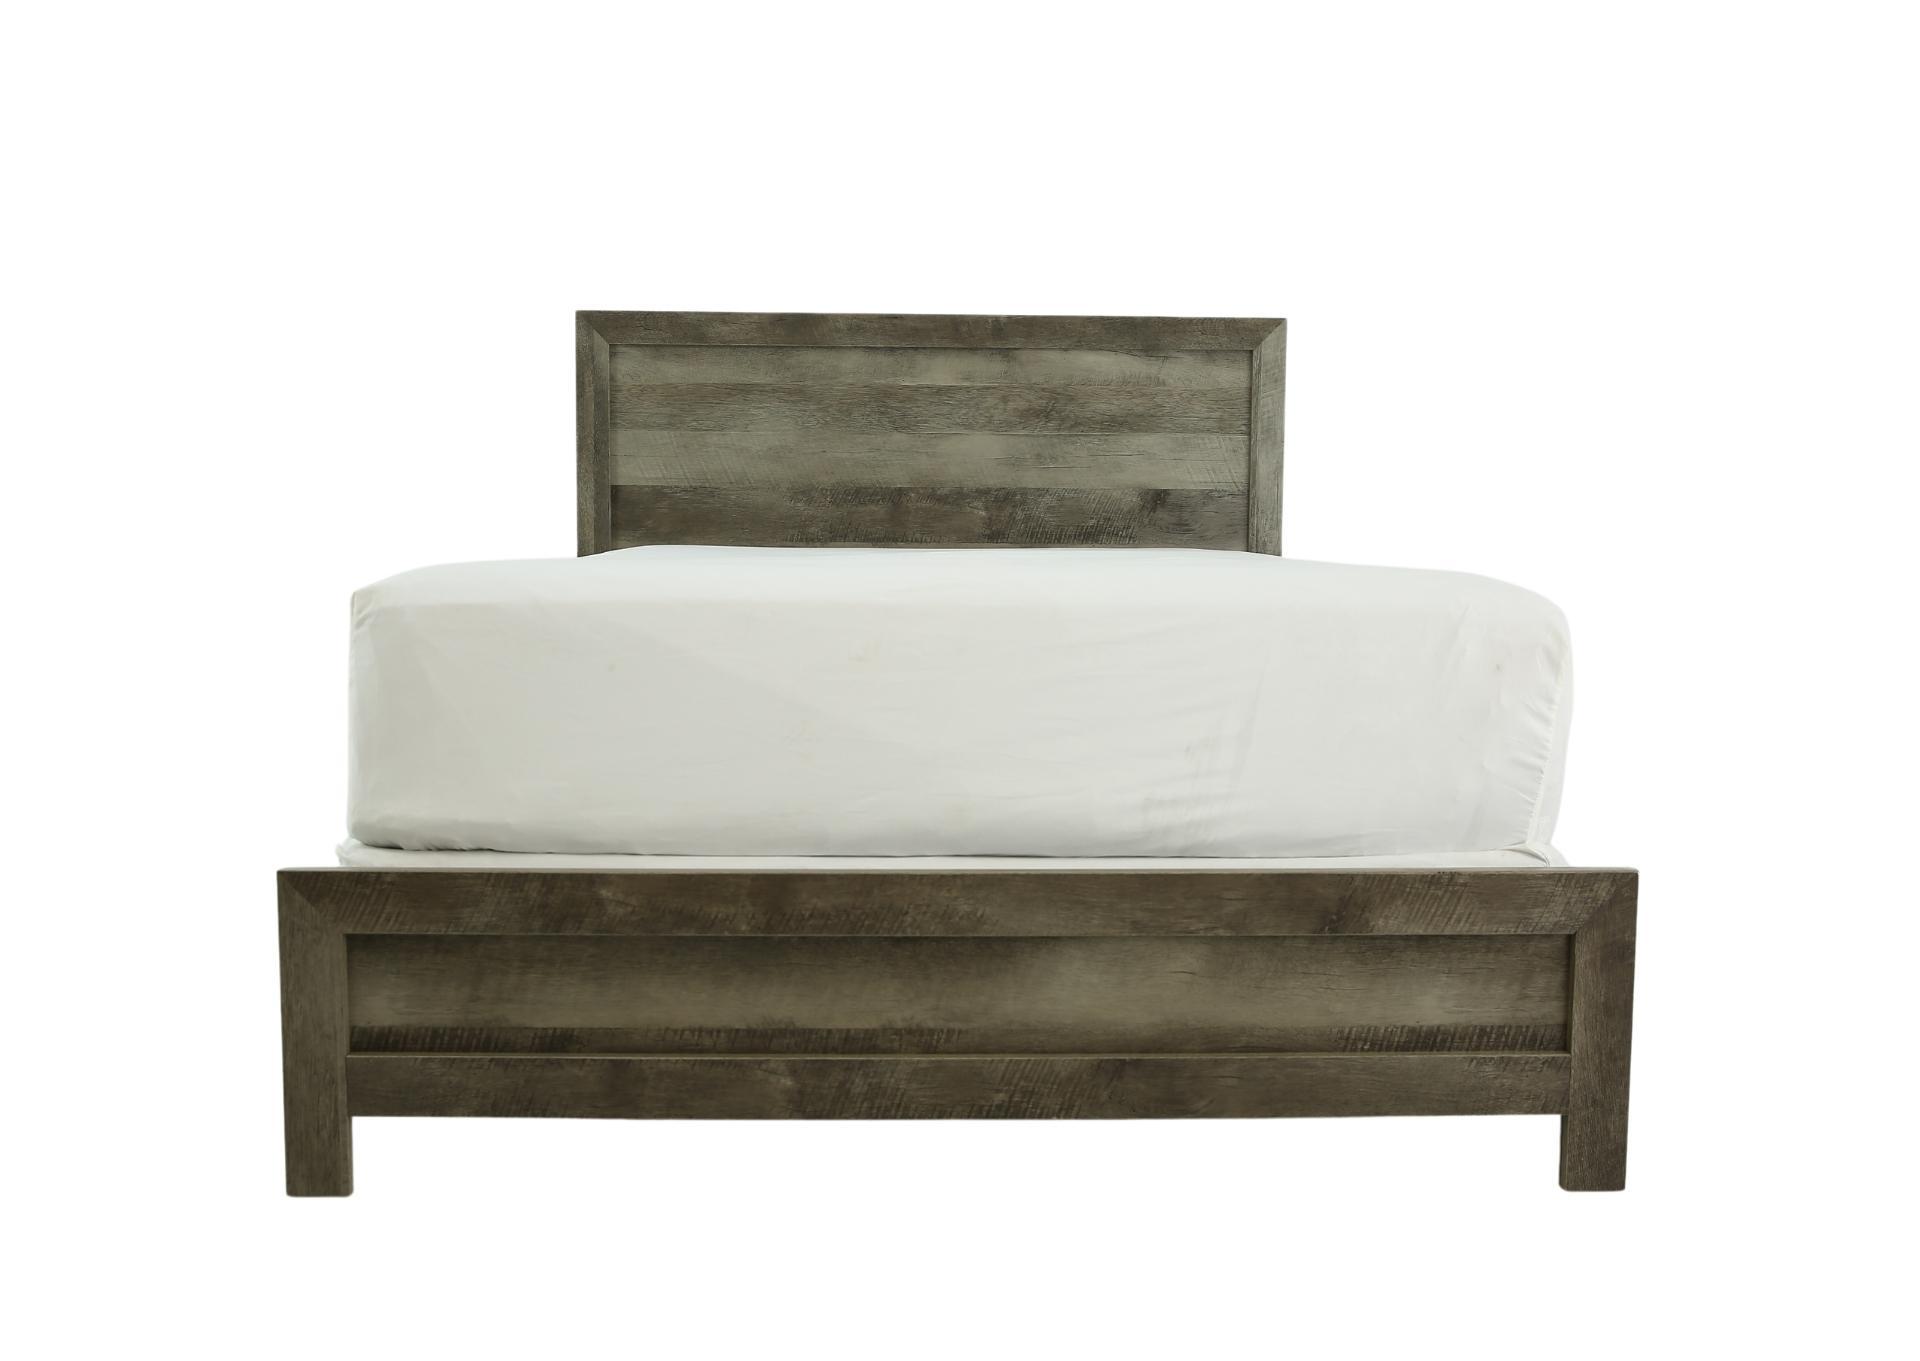 LANGSTON QUEEN BED,KITH FURNITURE